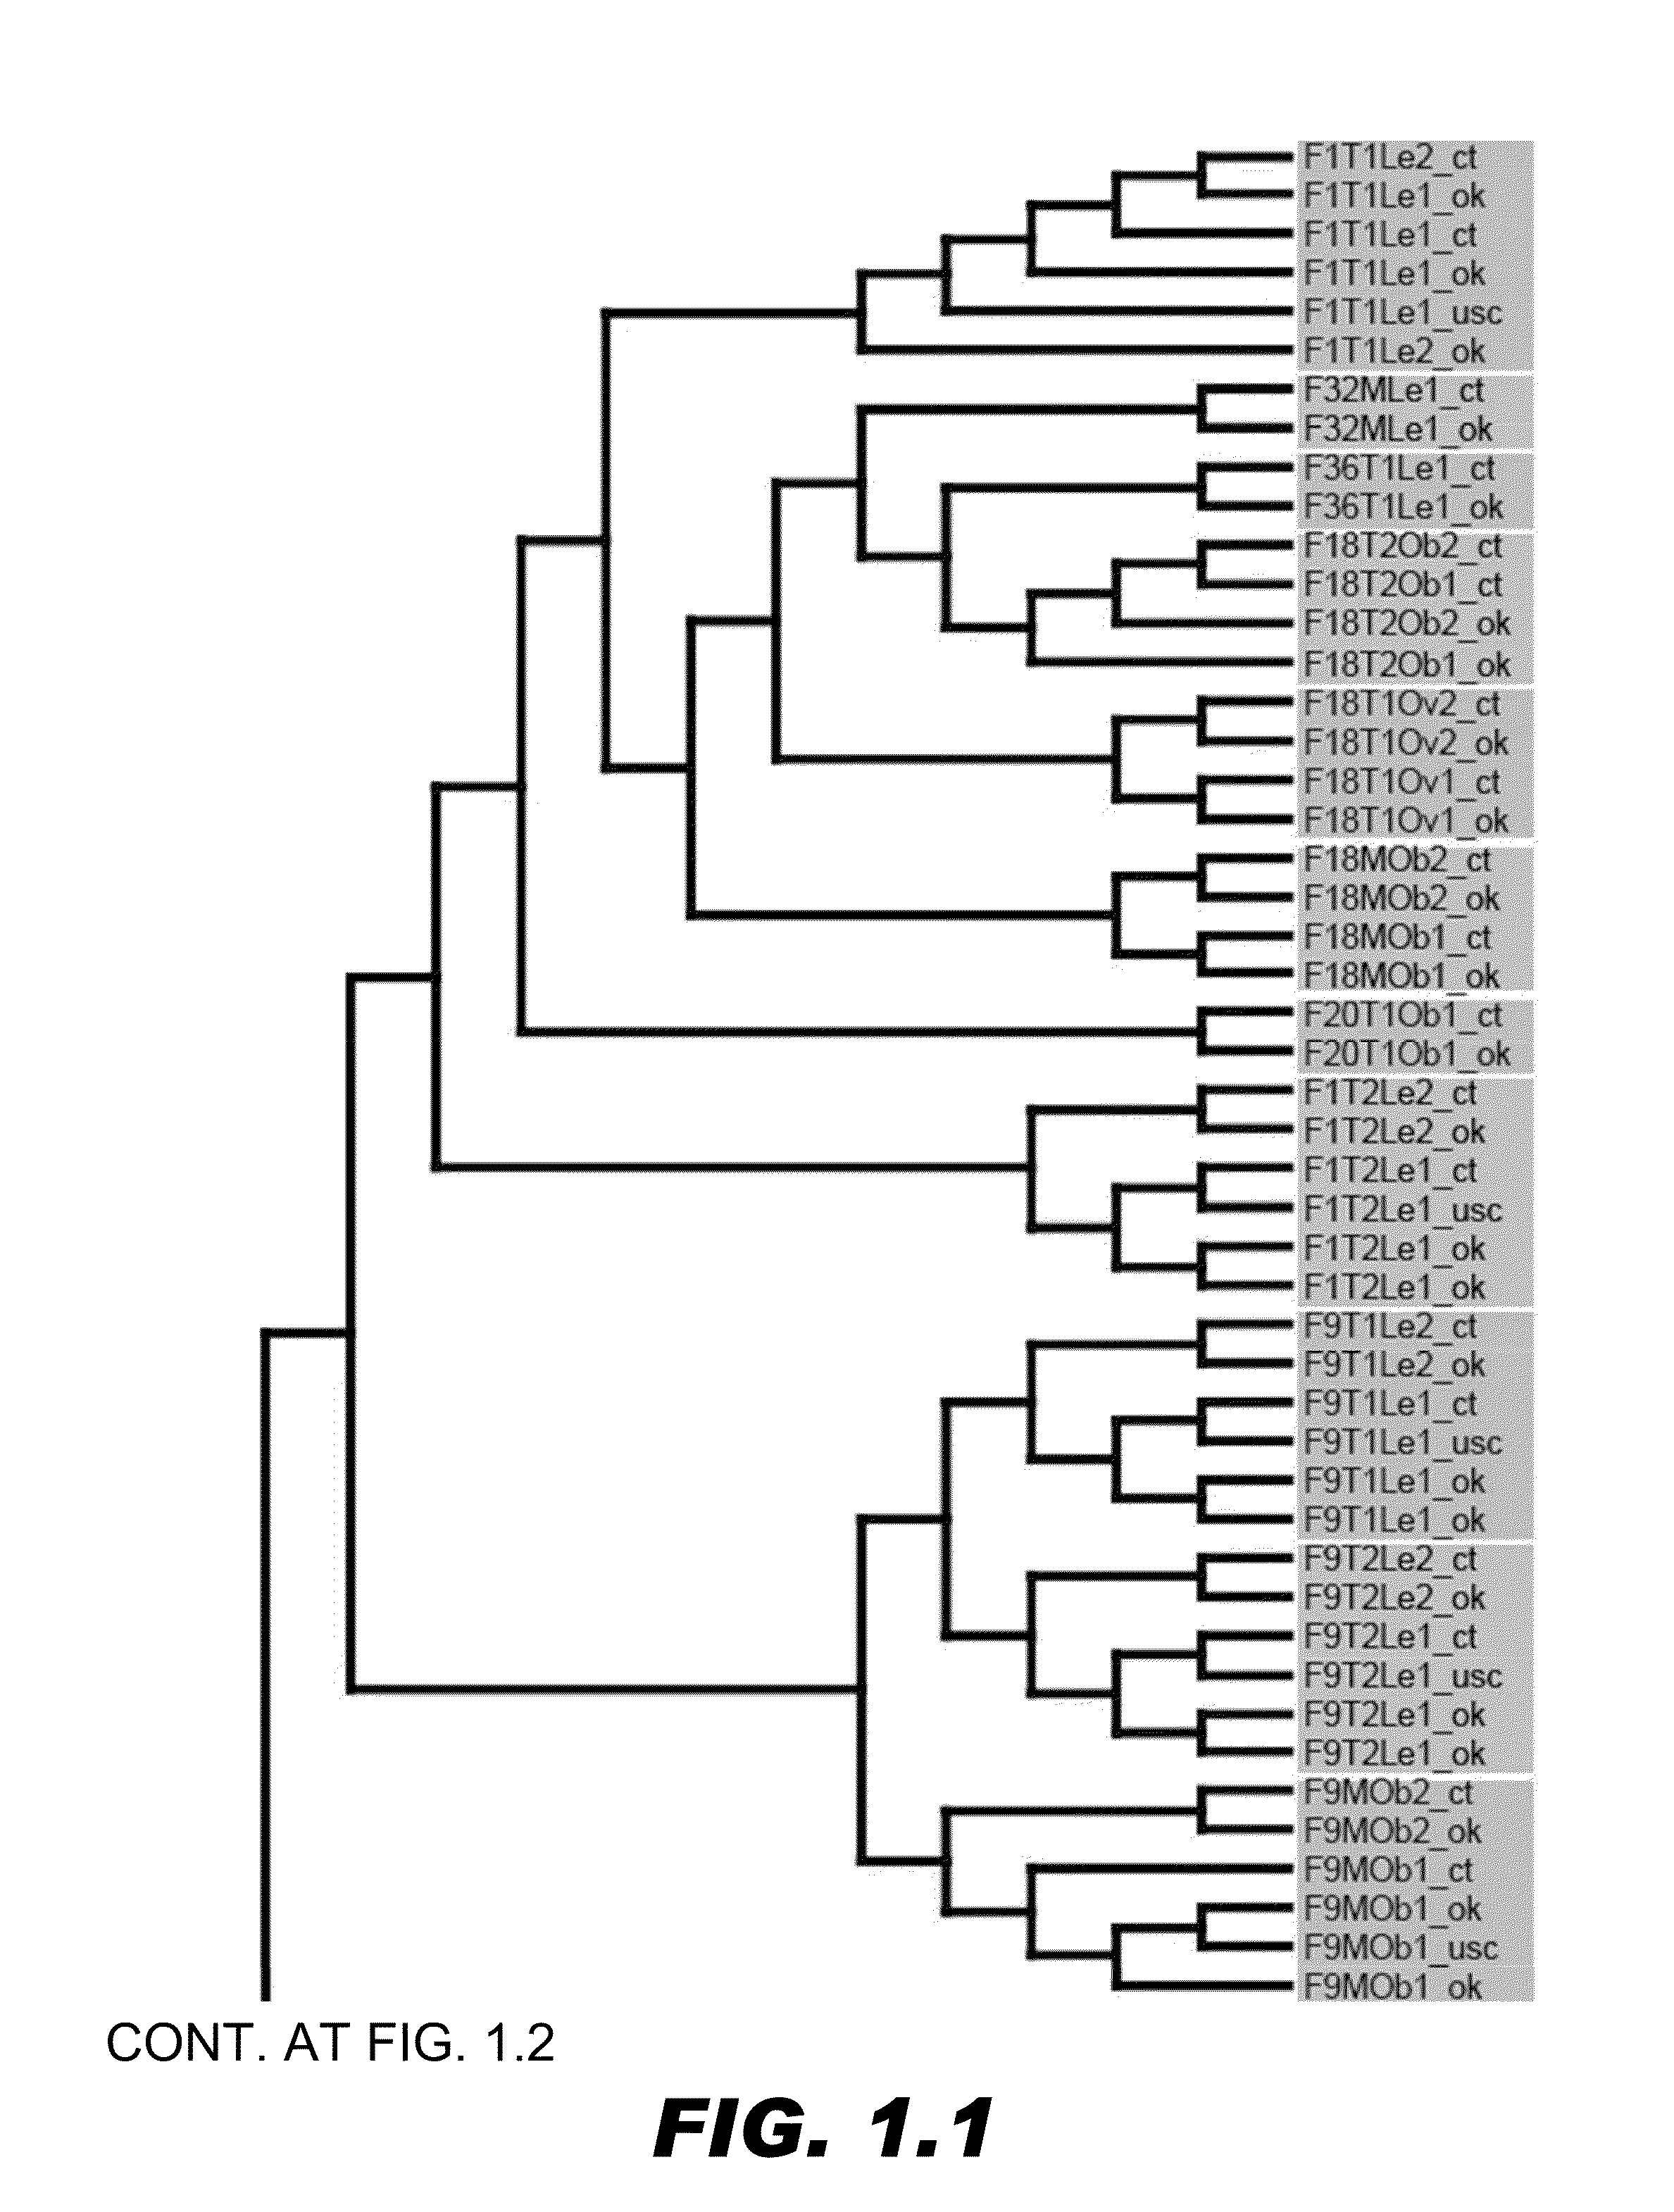 Methods for promoting weight loss and associated arrays